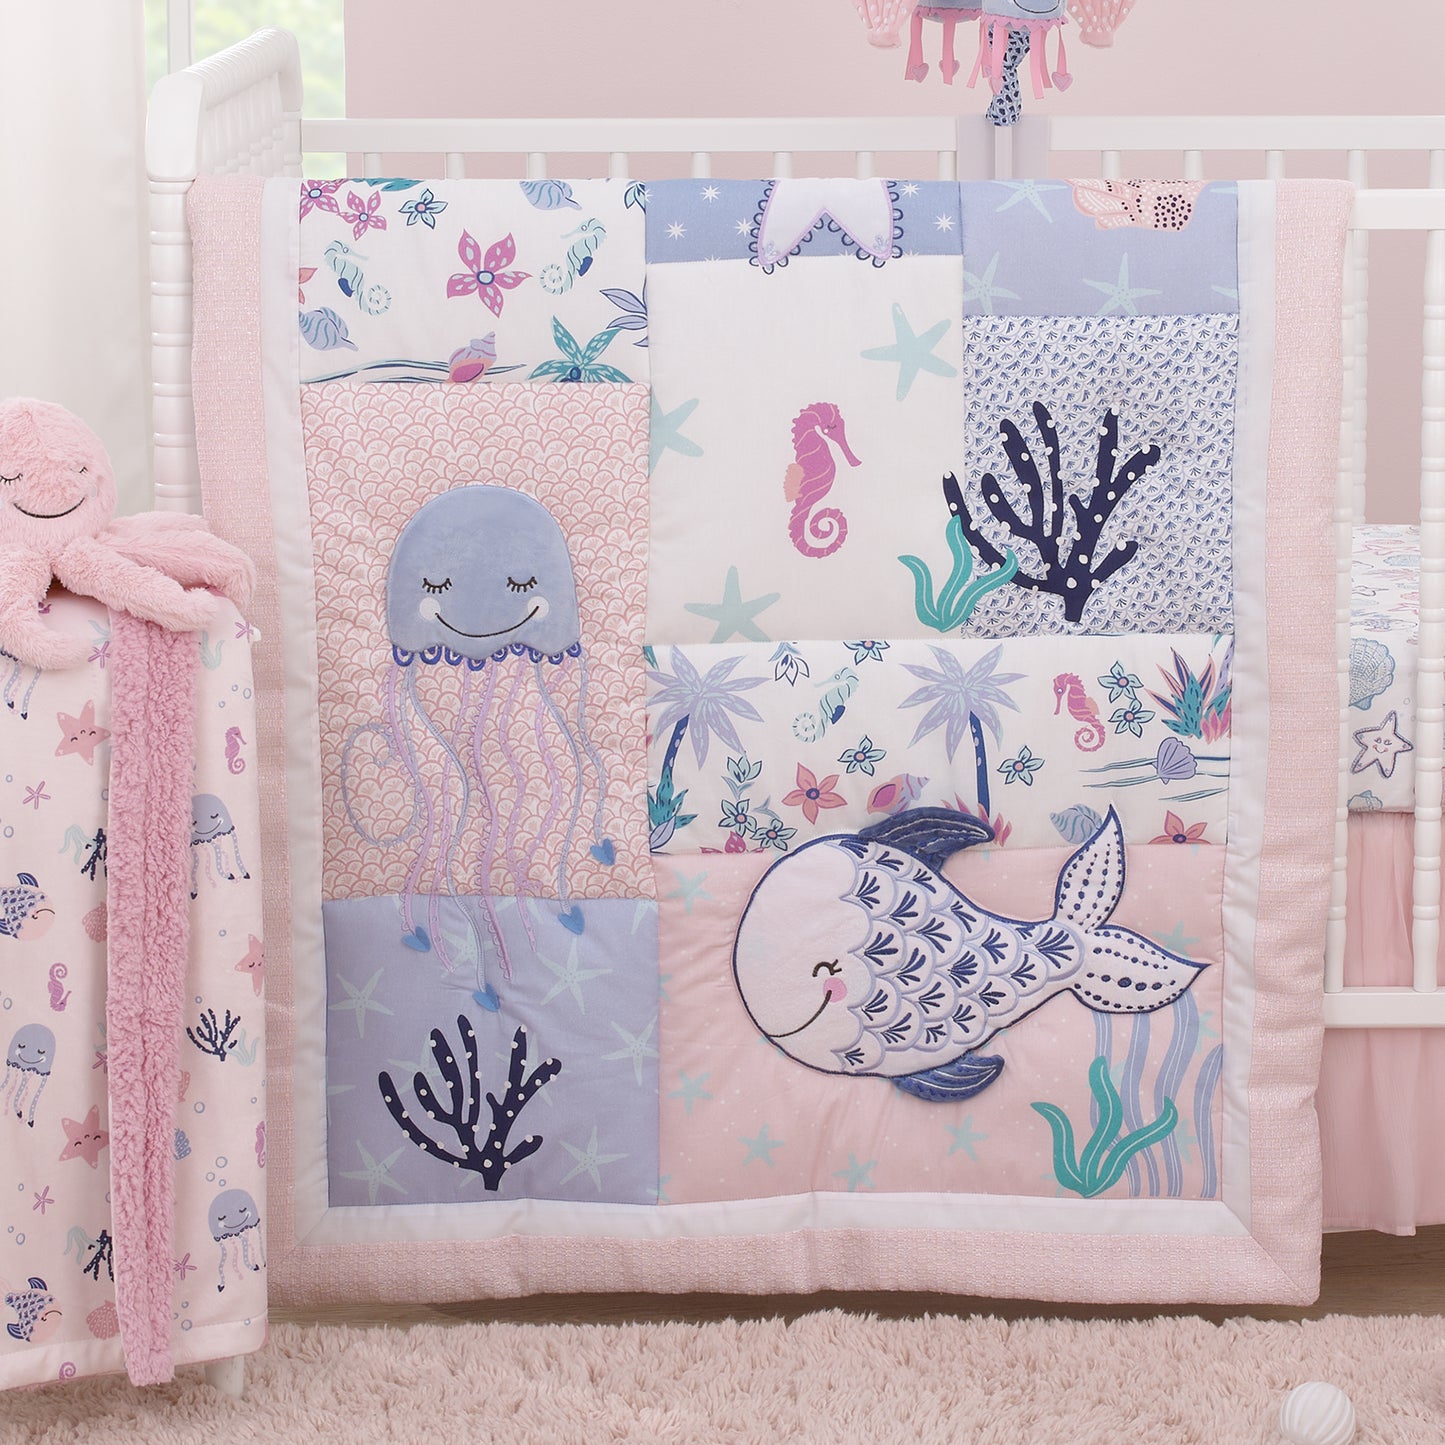 NoJo Mermaid Lagoon Pink, Blue and White Undersea Friends, Fish, Coral, Jellyfish and Starfish 4 Piece Nursery Crib Bedding Set - Comforter, 100% Cotton Fitted Crib Sheet, Crib Skirt, and Storage Caddy